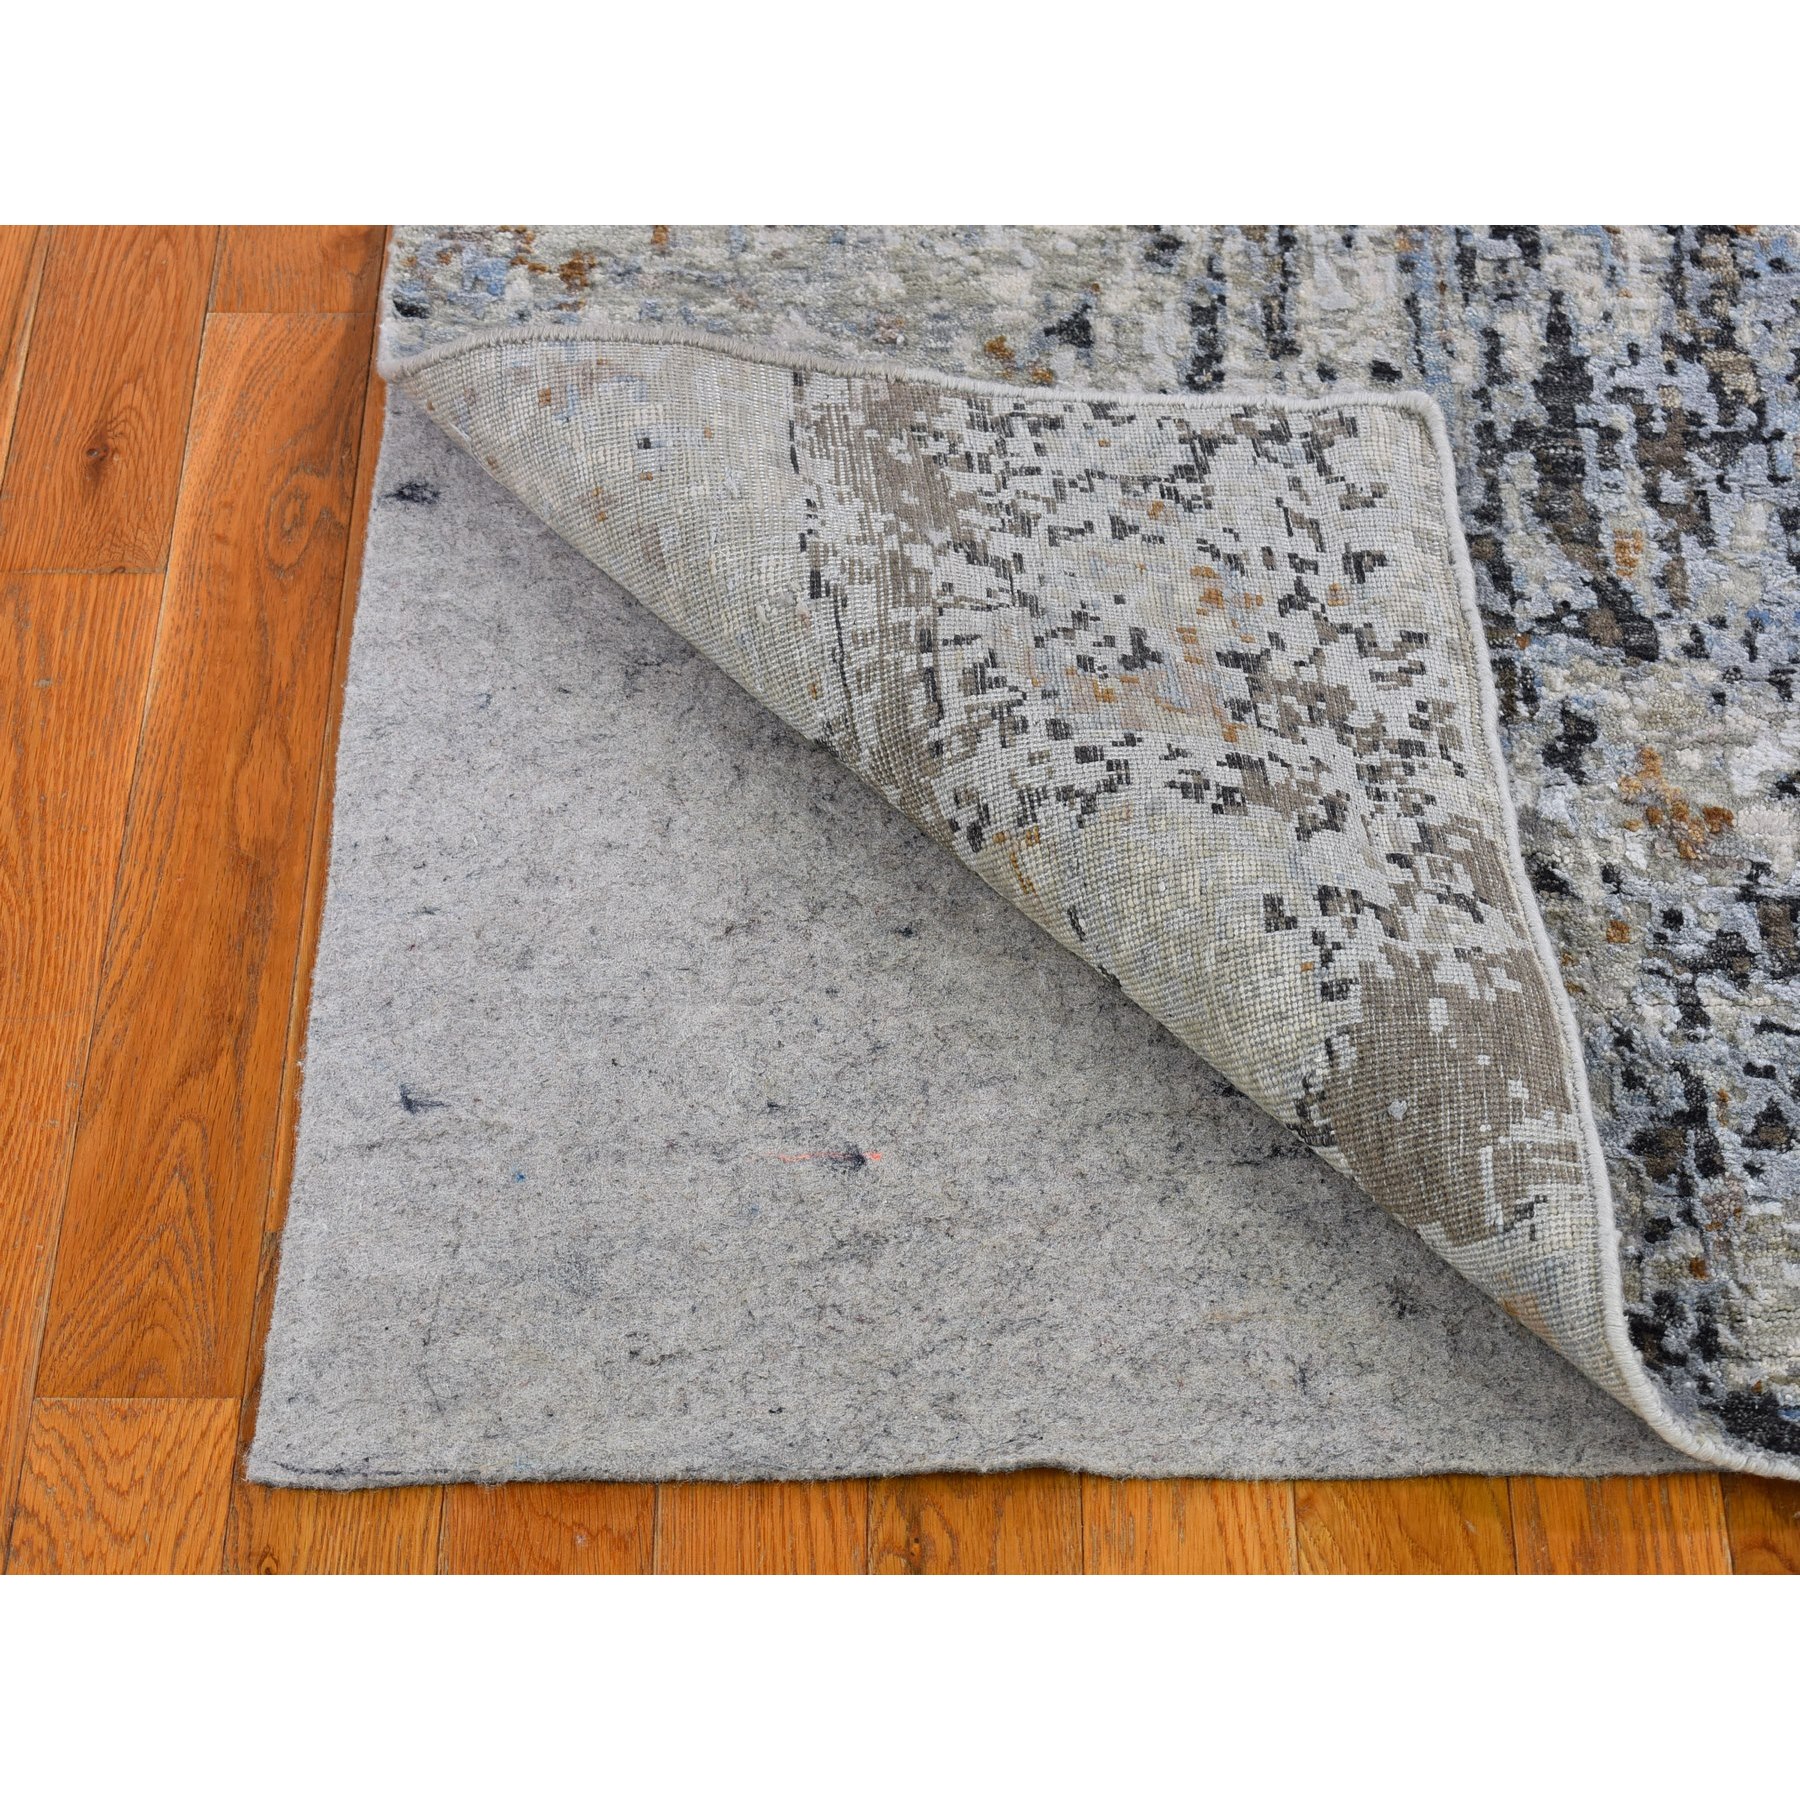 2'5"x10'2" Gray Persian Knot with Abstract Design Wool and Silk Denser Weave Hand Woven Runner Oriental Rug 